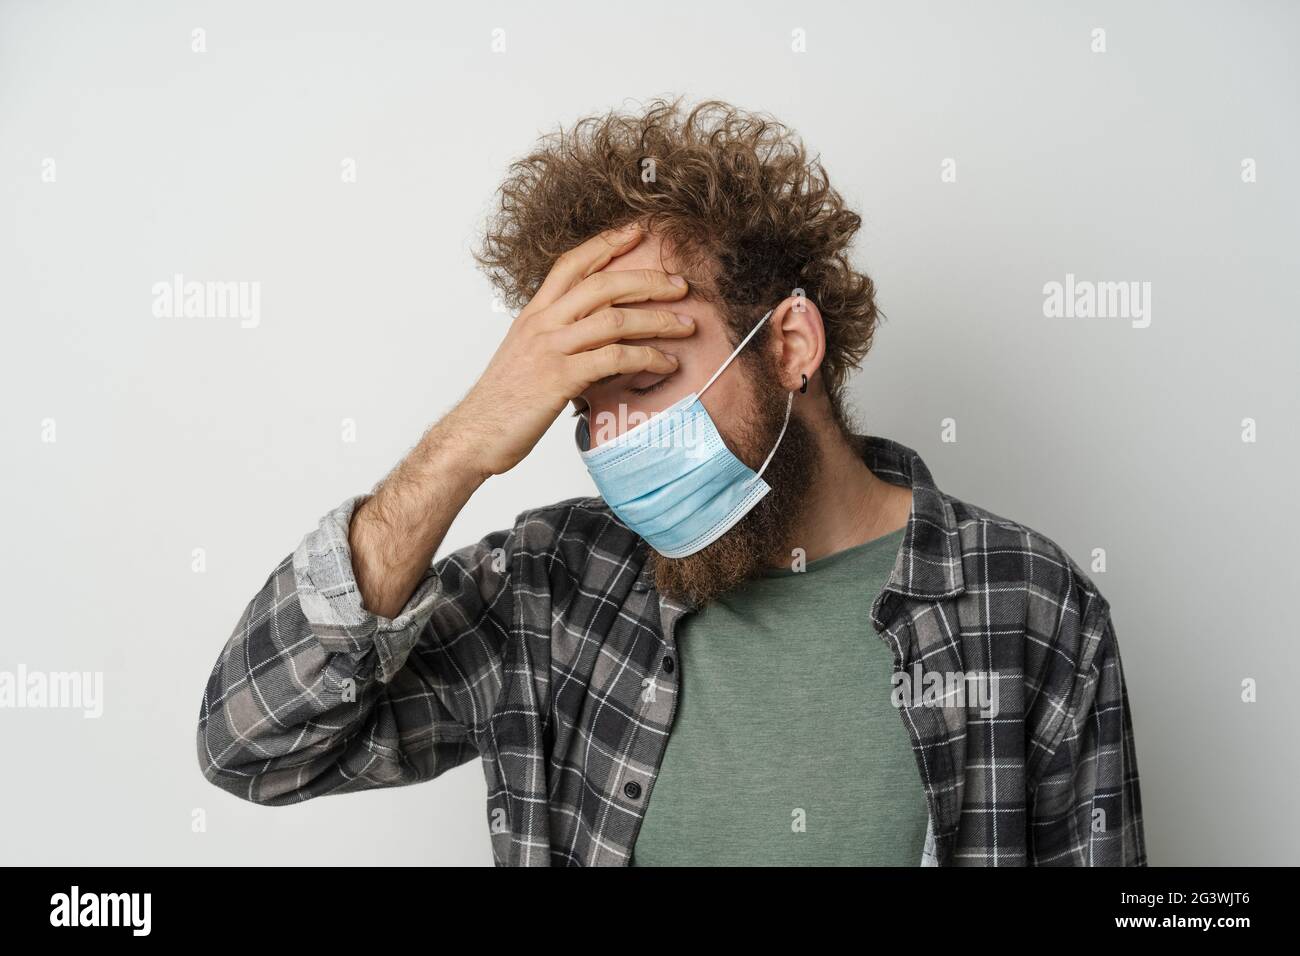 Suffer of headache wearing protective sterile medical mask on his face to protect coronavirus curly hair young man wearing plaid Stock Photo